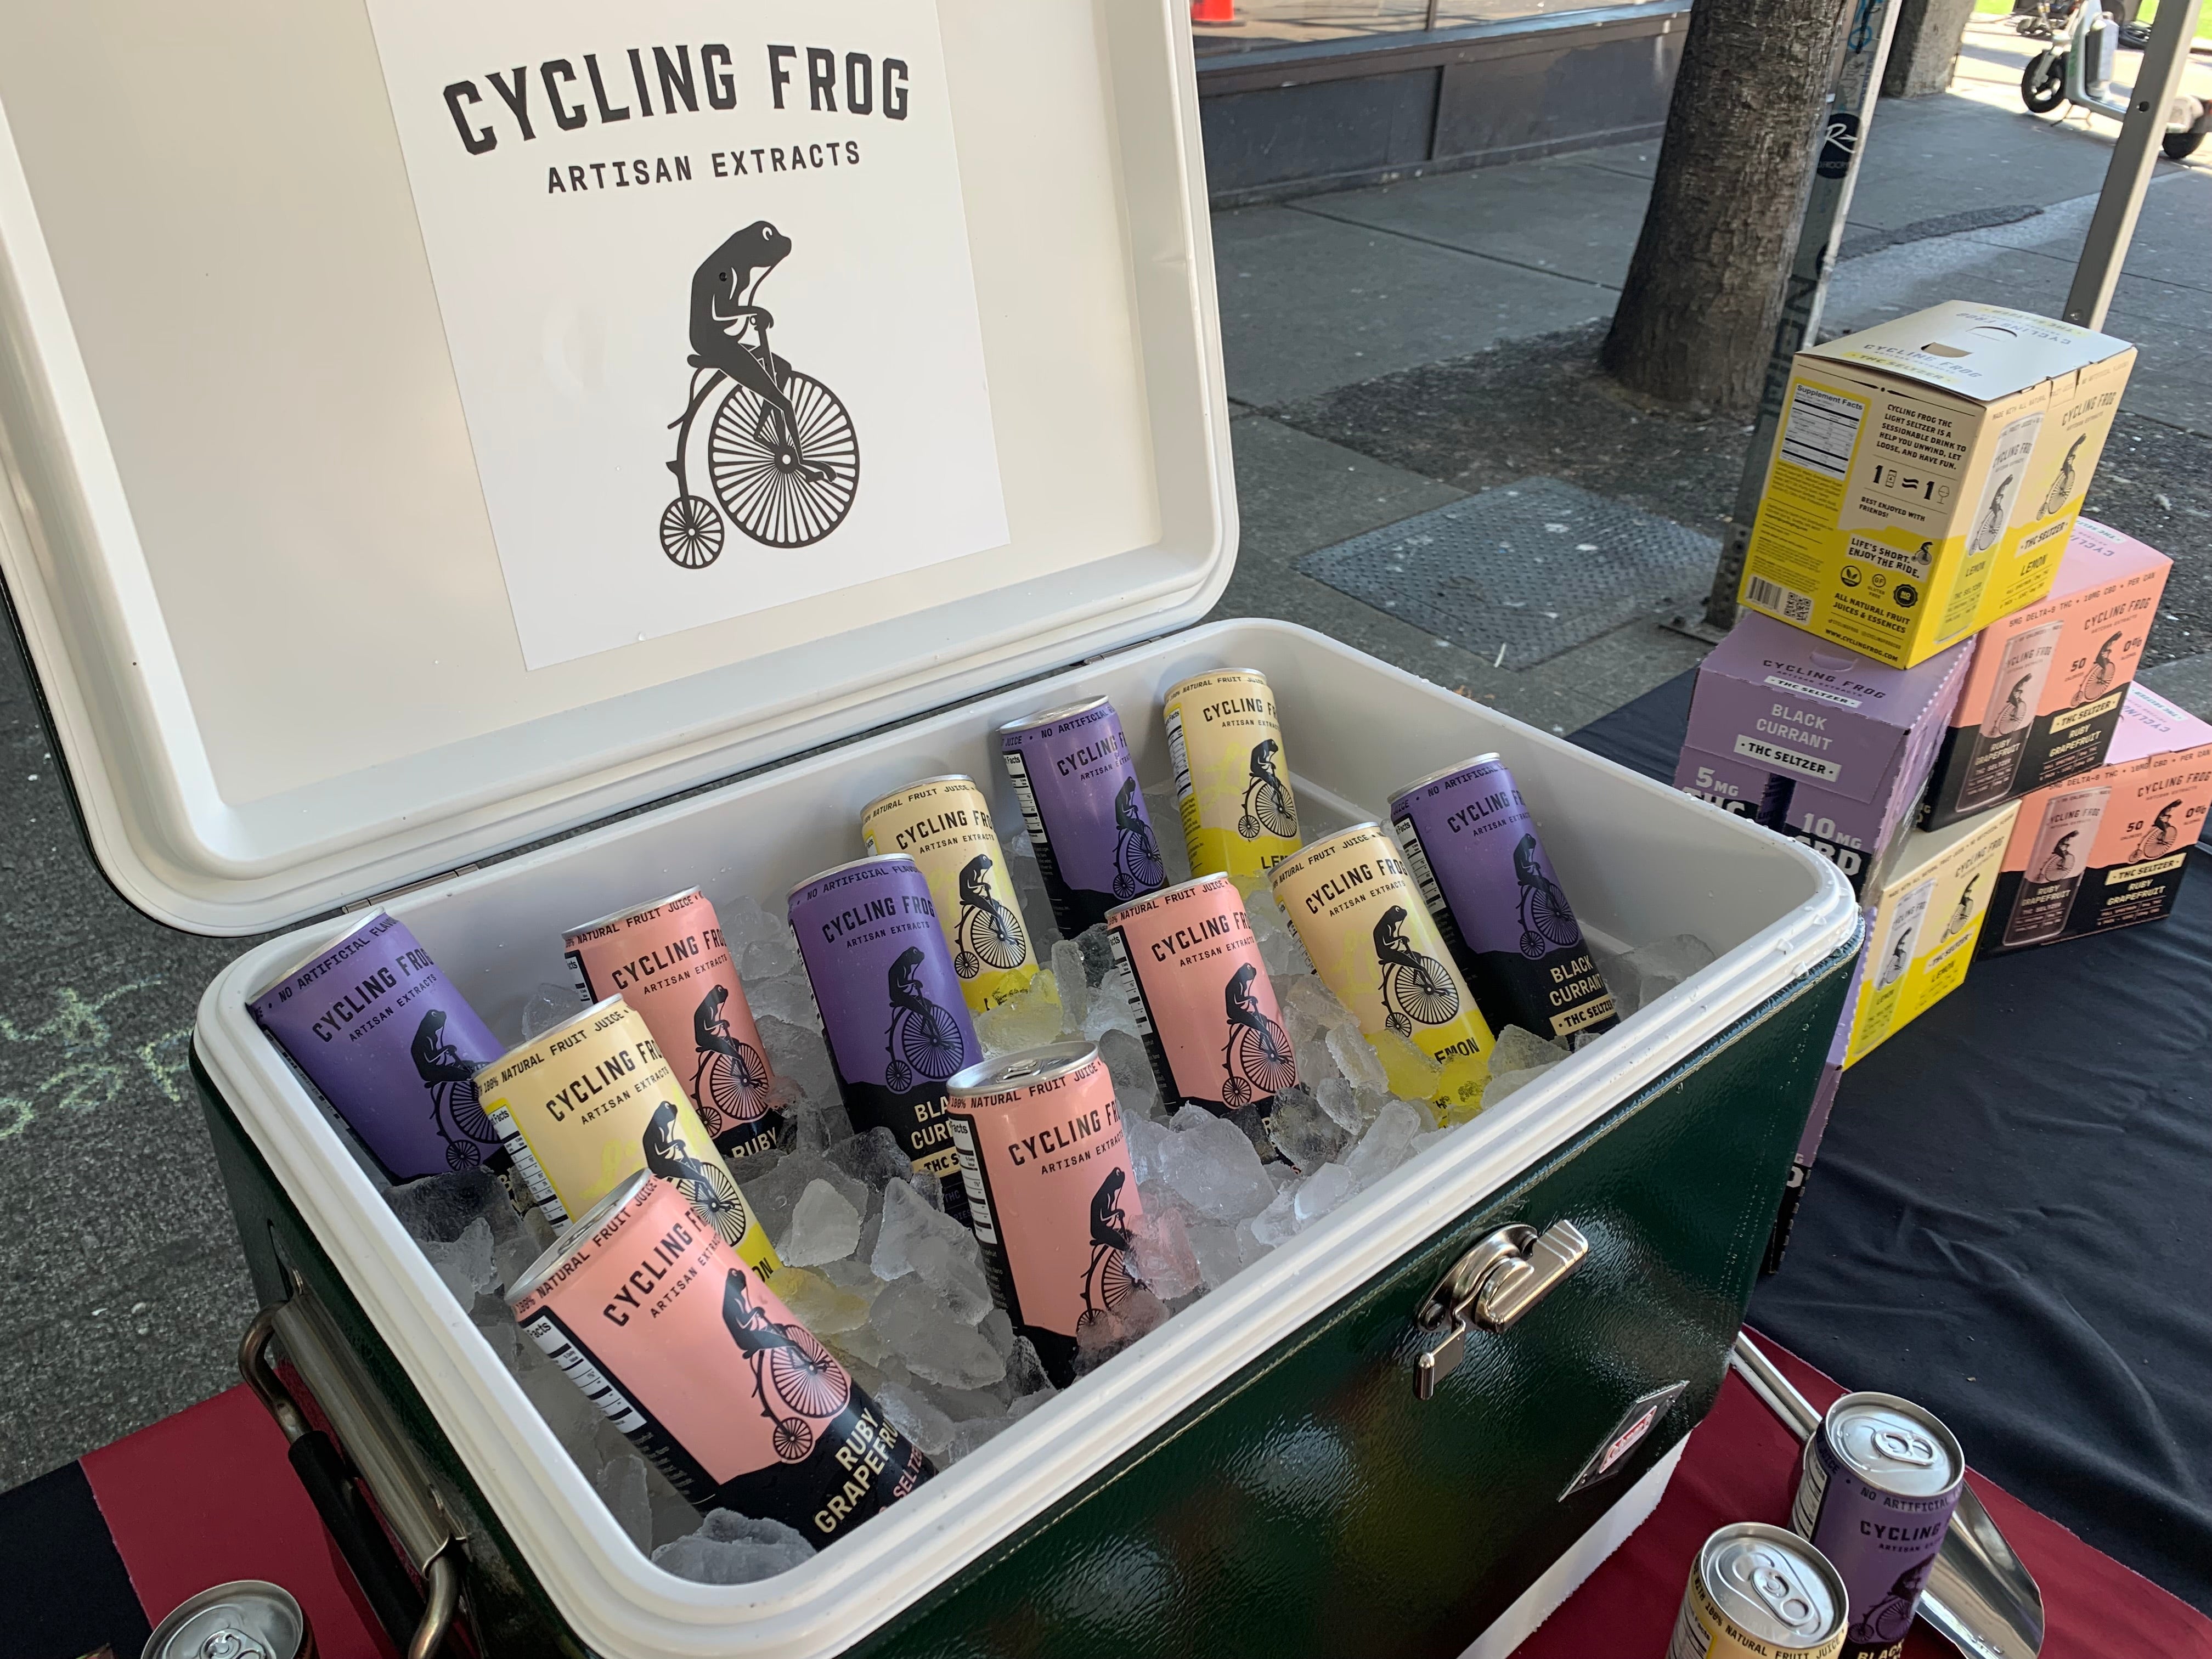 Buy 4 packs of Cycling Frog THC seltzer, get one free! Use code VIBEMORE at checkout.